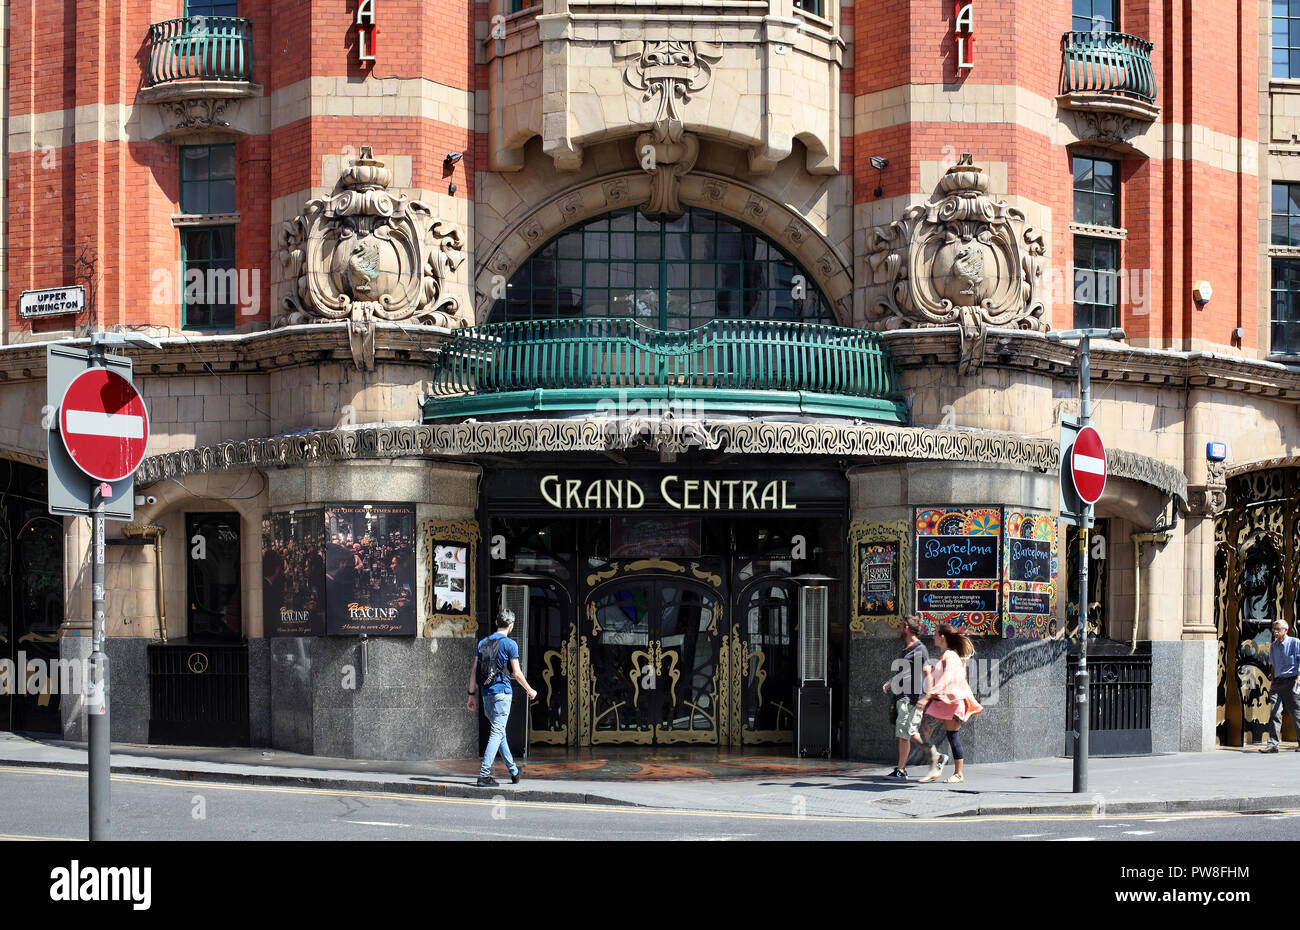 The entrance to Grand Central (the former Central Hall), Renshaw Street, Liverpool. Designed by Bradshaw and Gass. Opened in 1905. Stock Photo